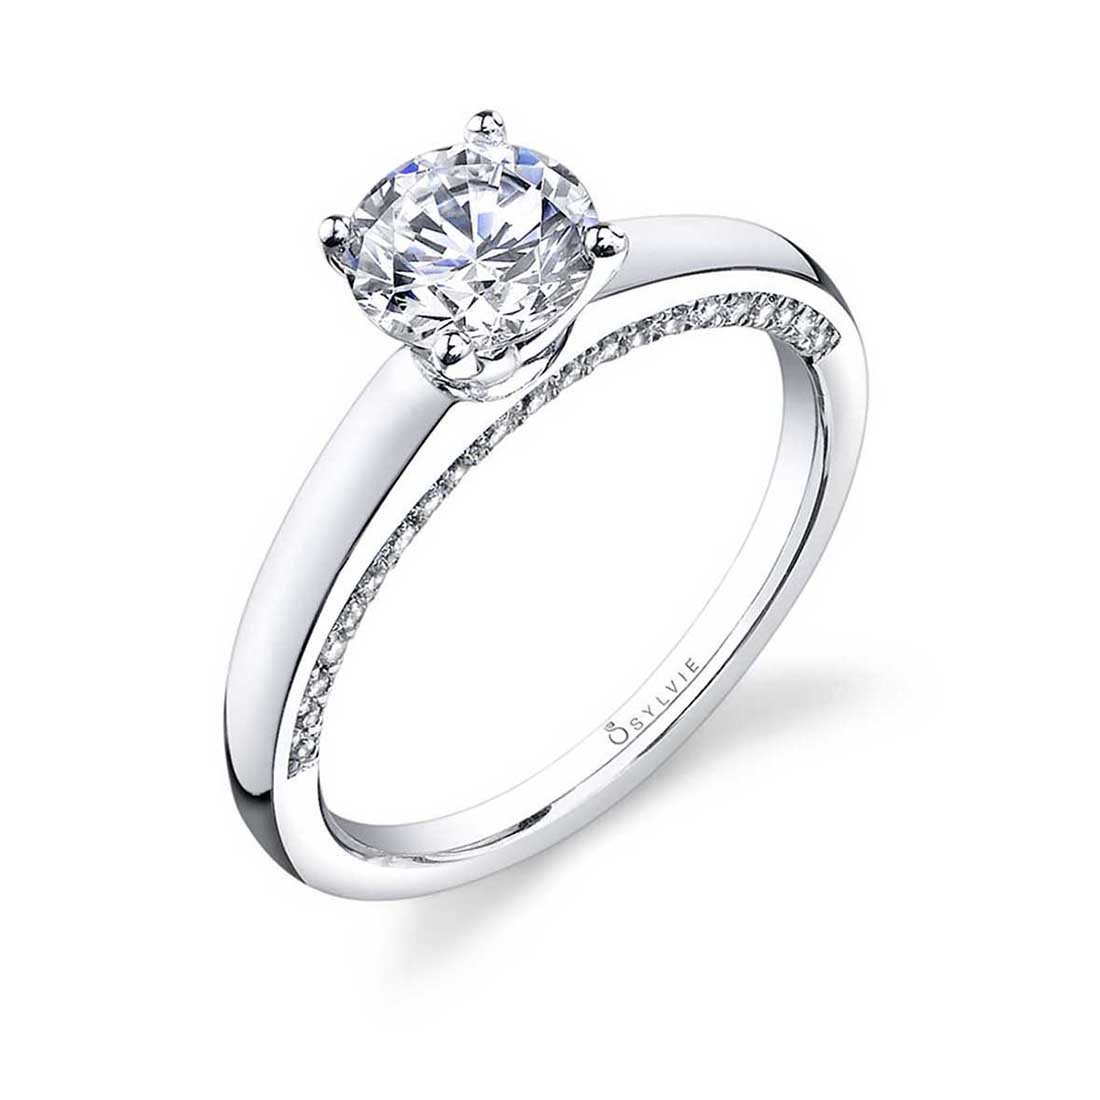 SY700 18K whith gold diamond engagement ring